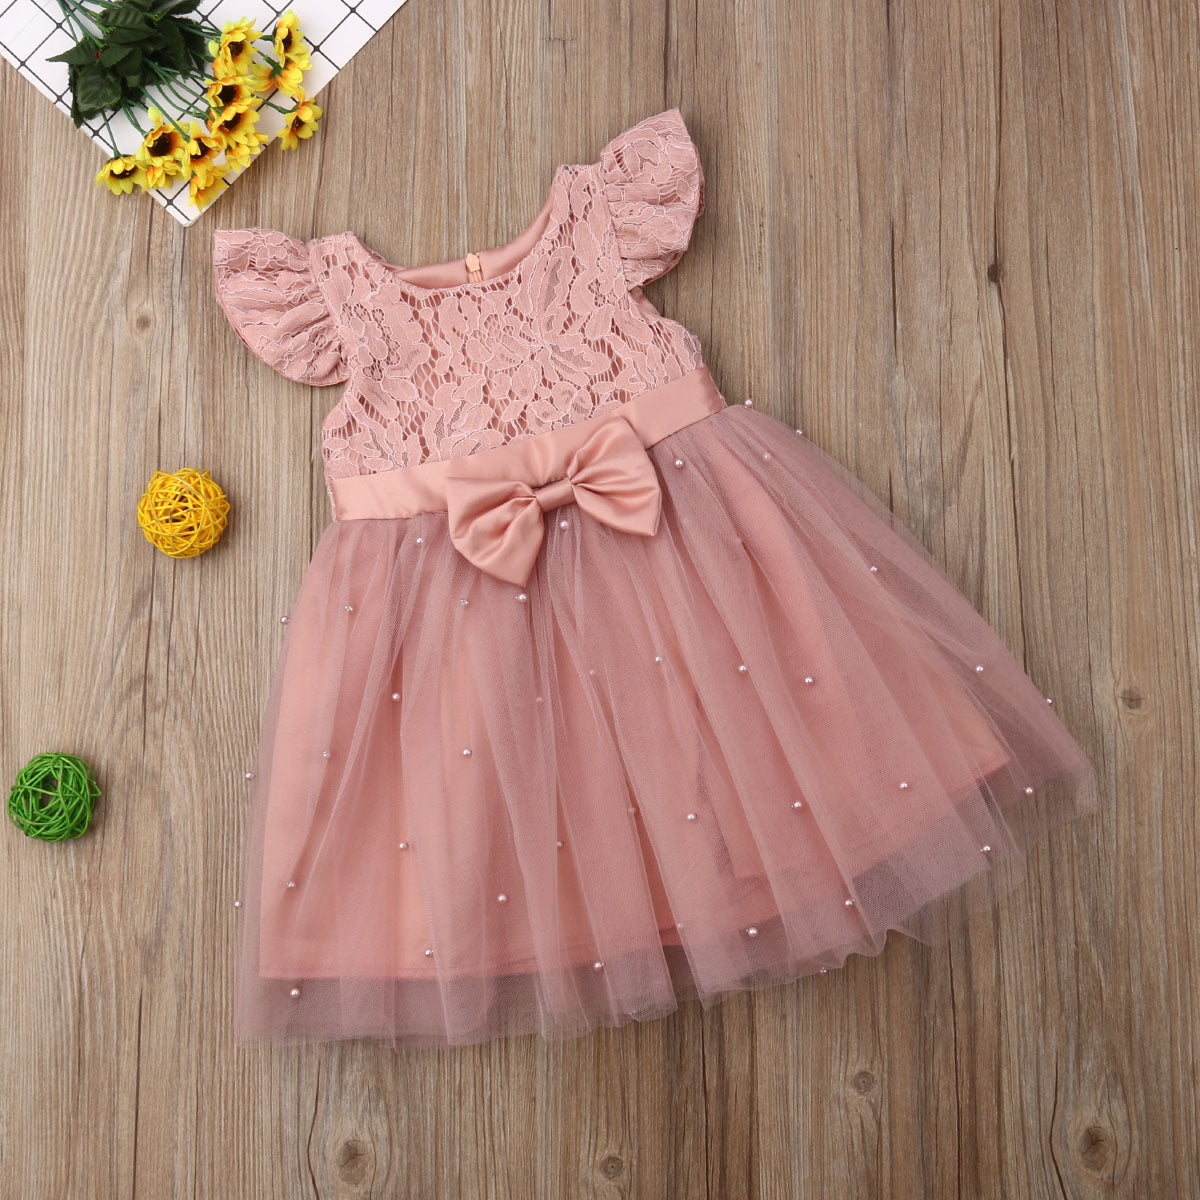 Girls Dress - Occasion Dress for Toddlers and Kids